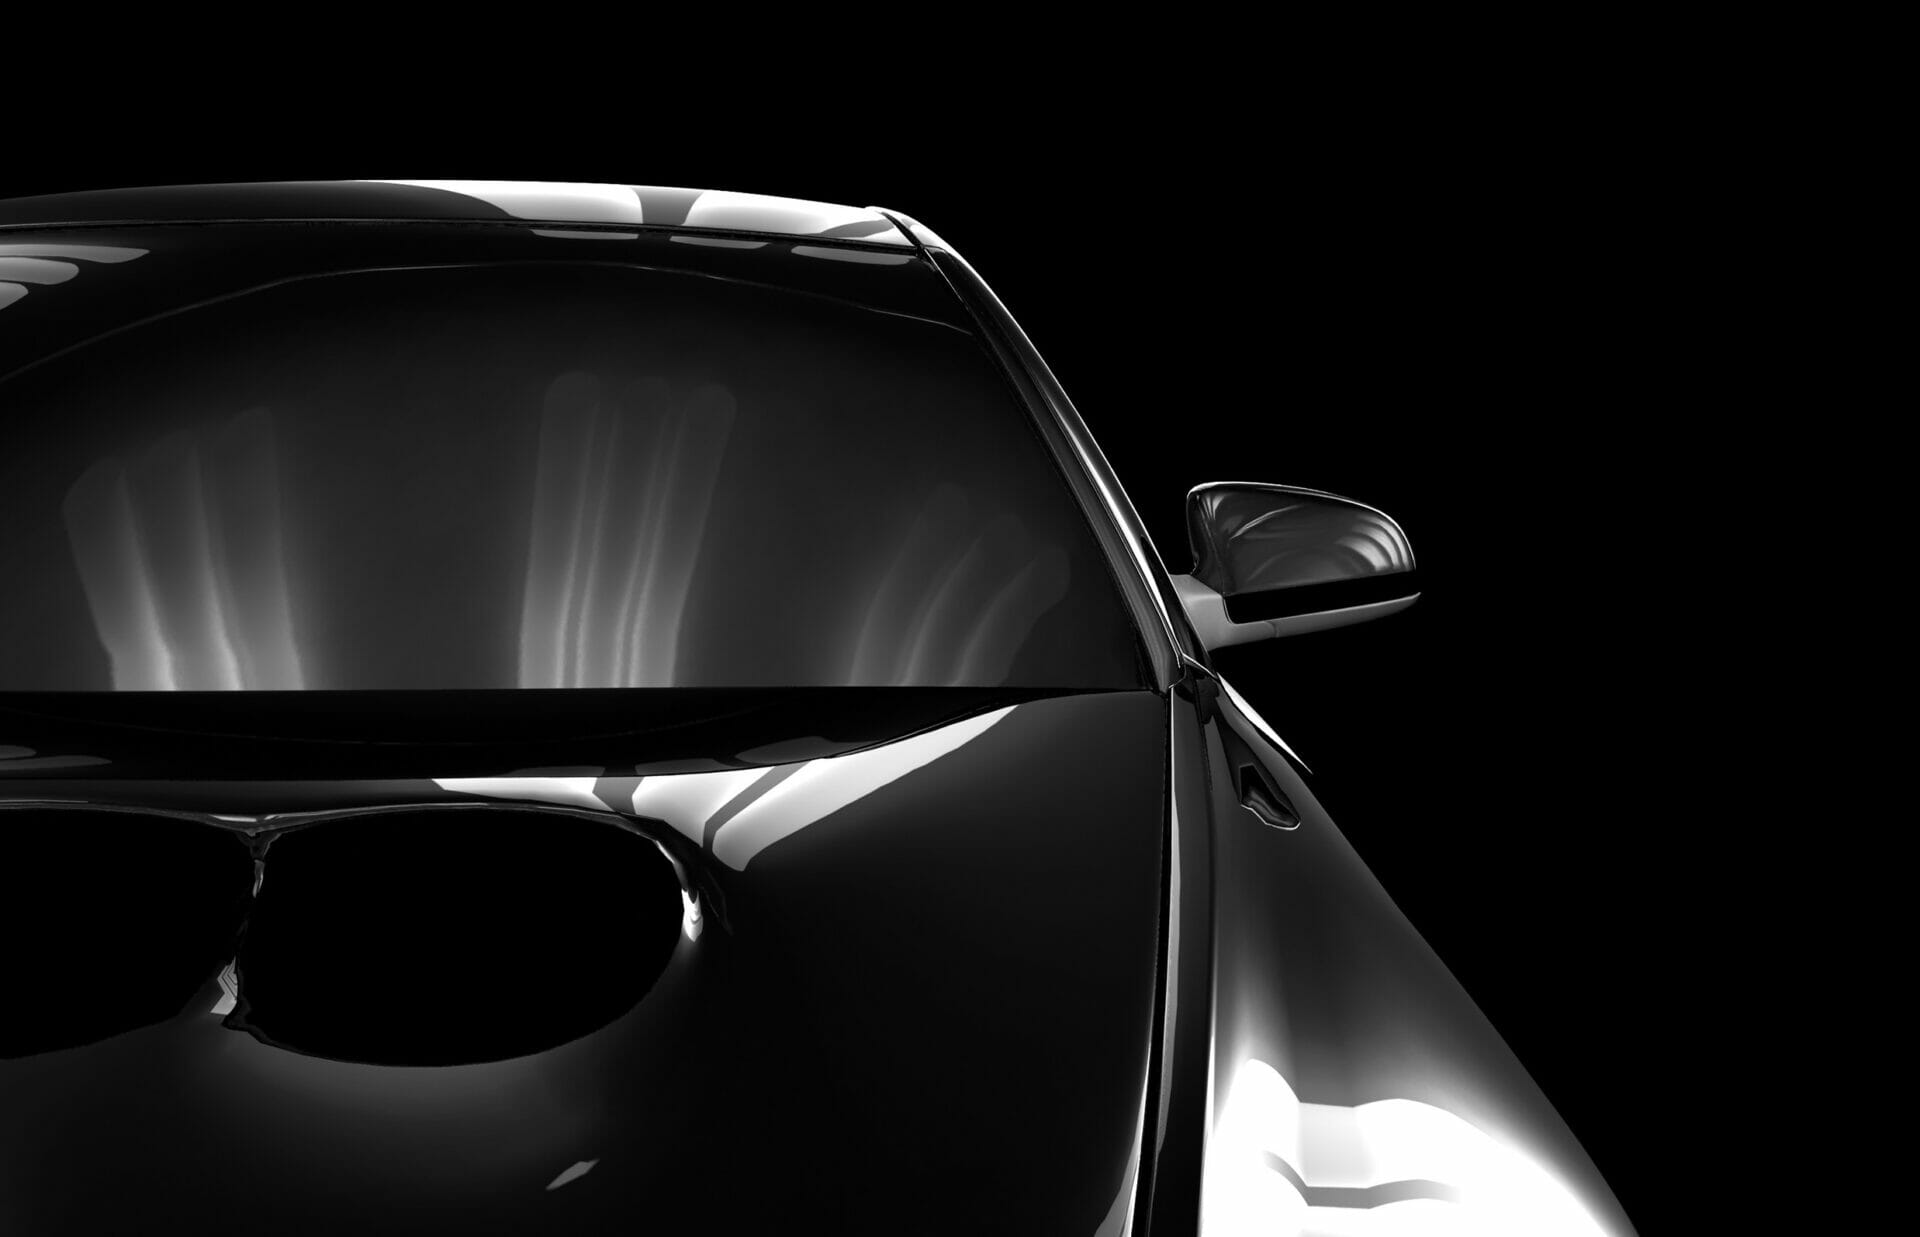 An image of a black car on a black background.